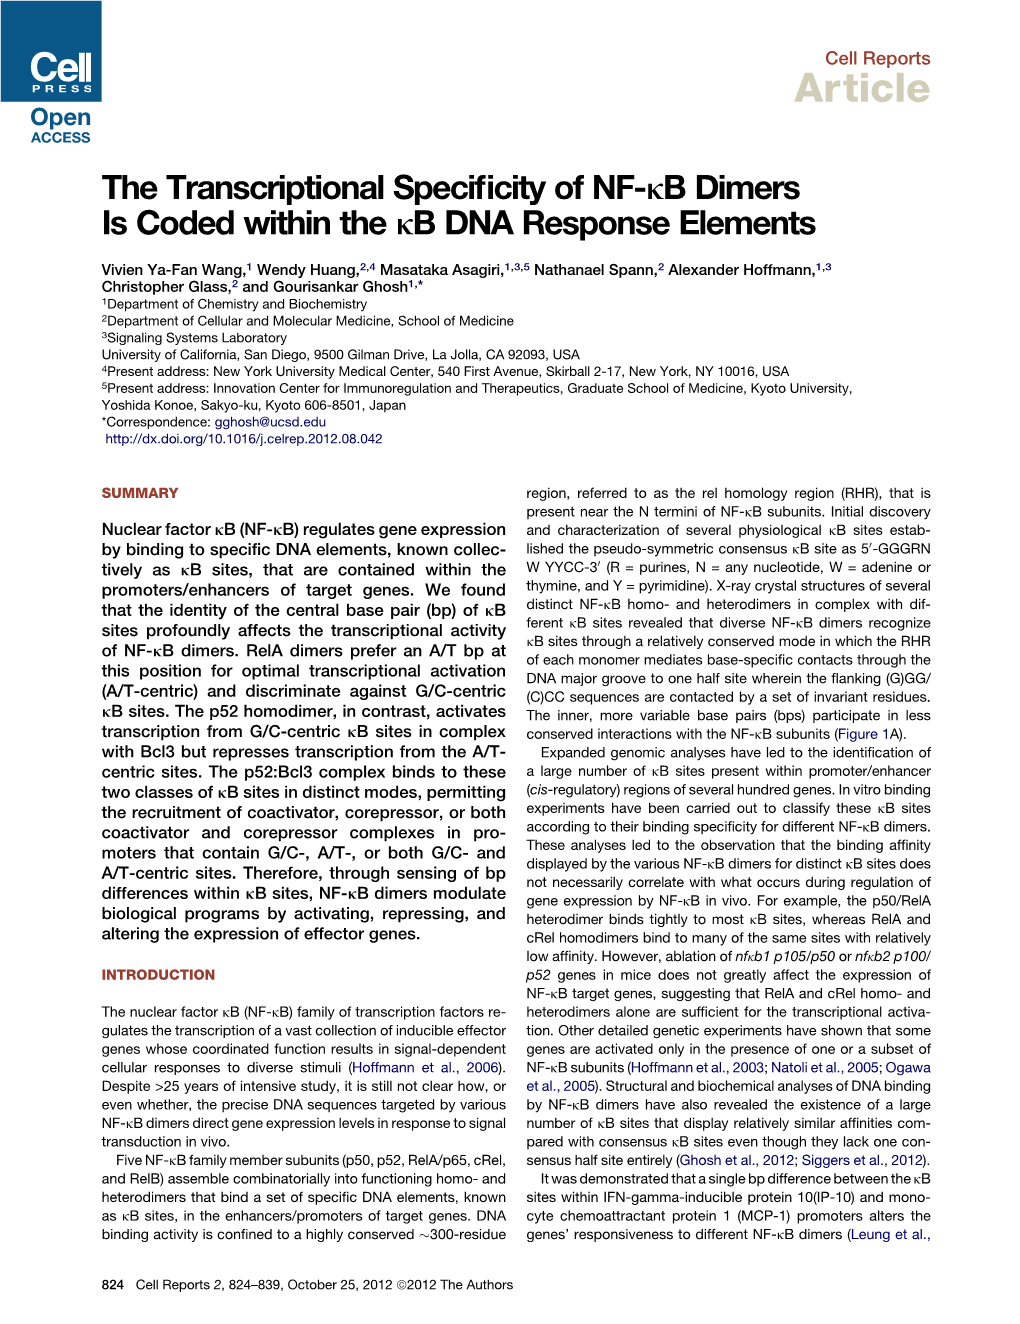 The Transcriptional Specificity of NF-Kb Dimers Is Coded Within The